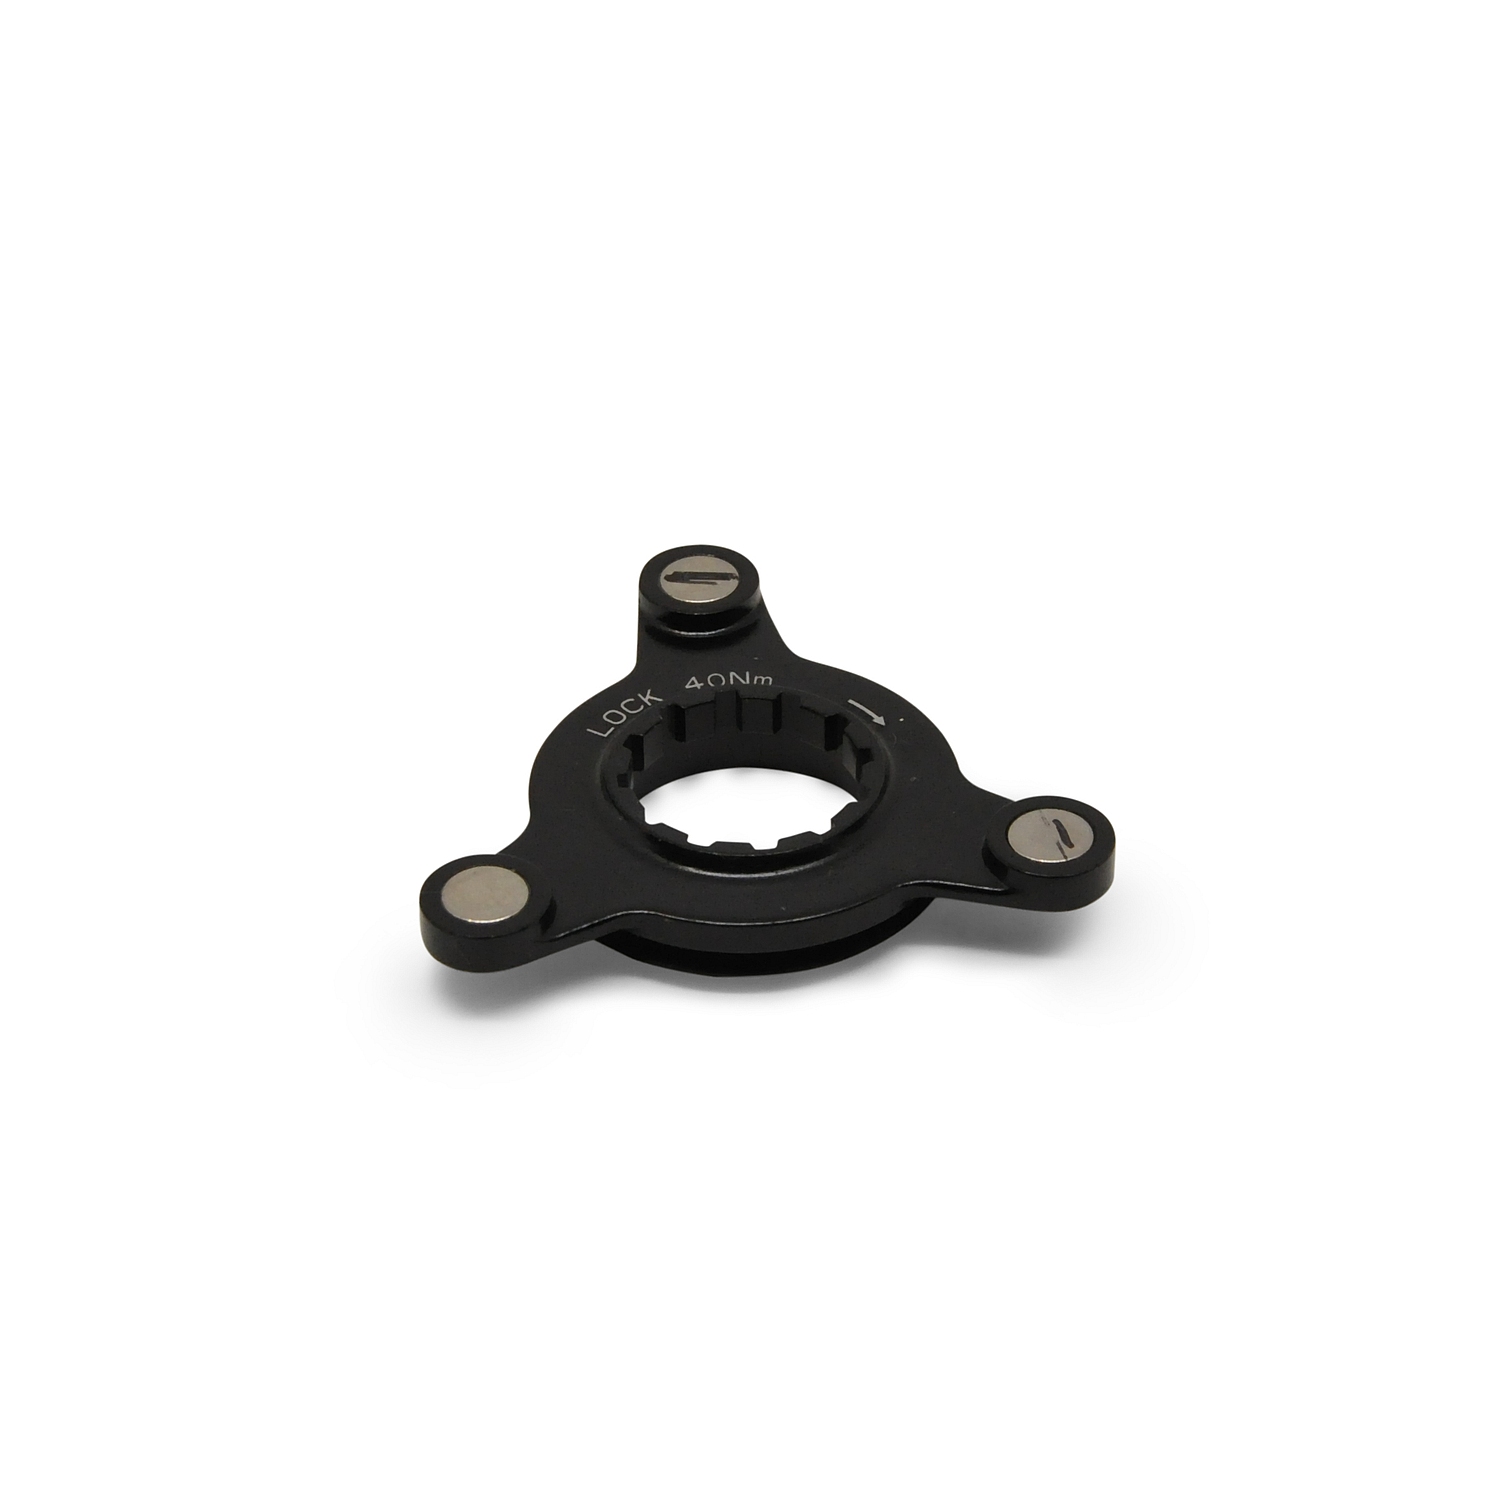 Picture of Rocky Mountain Speed Sensor Magnet for Dyname 4 Drive Unit | Centerlock - #1812026